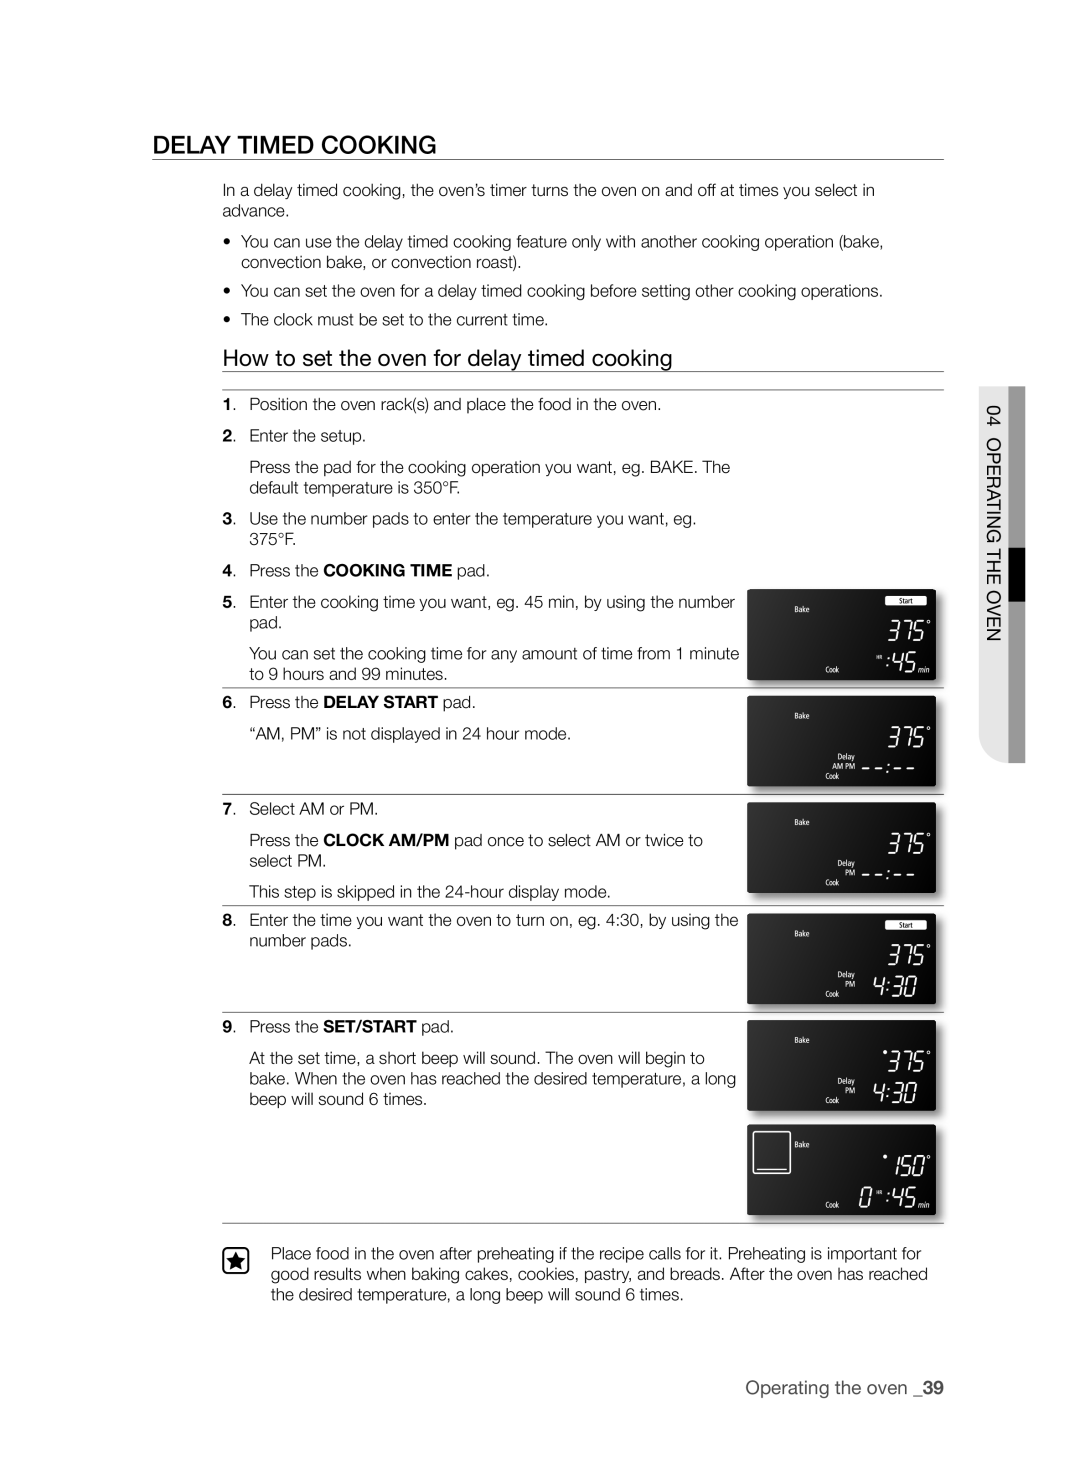 Samsung FTQ307NWGX user manual Delay timed cooking, How to set the oven for delay timed cooking, Operating The Oven 